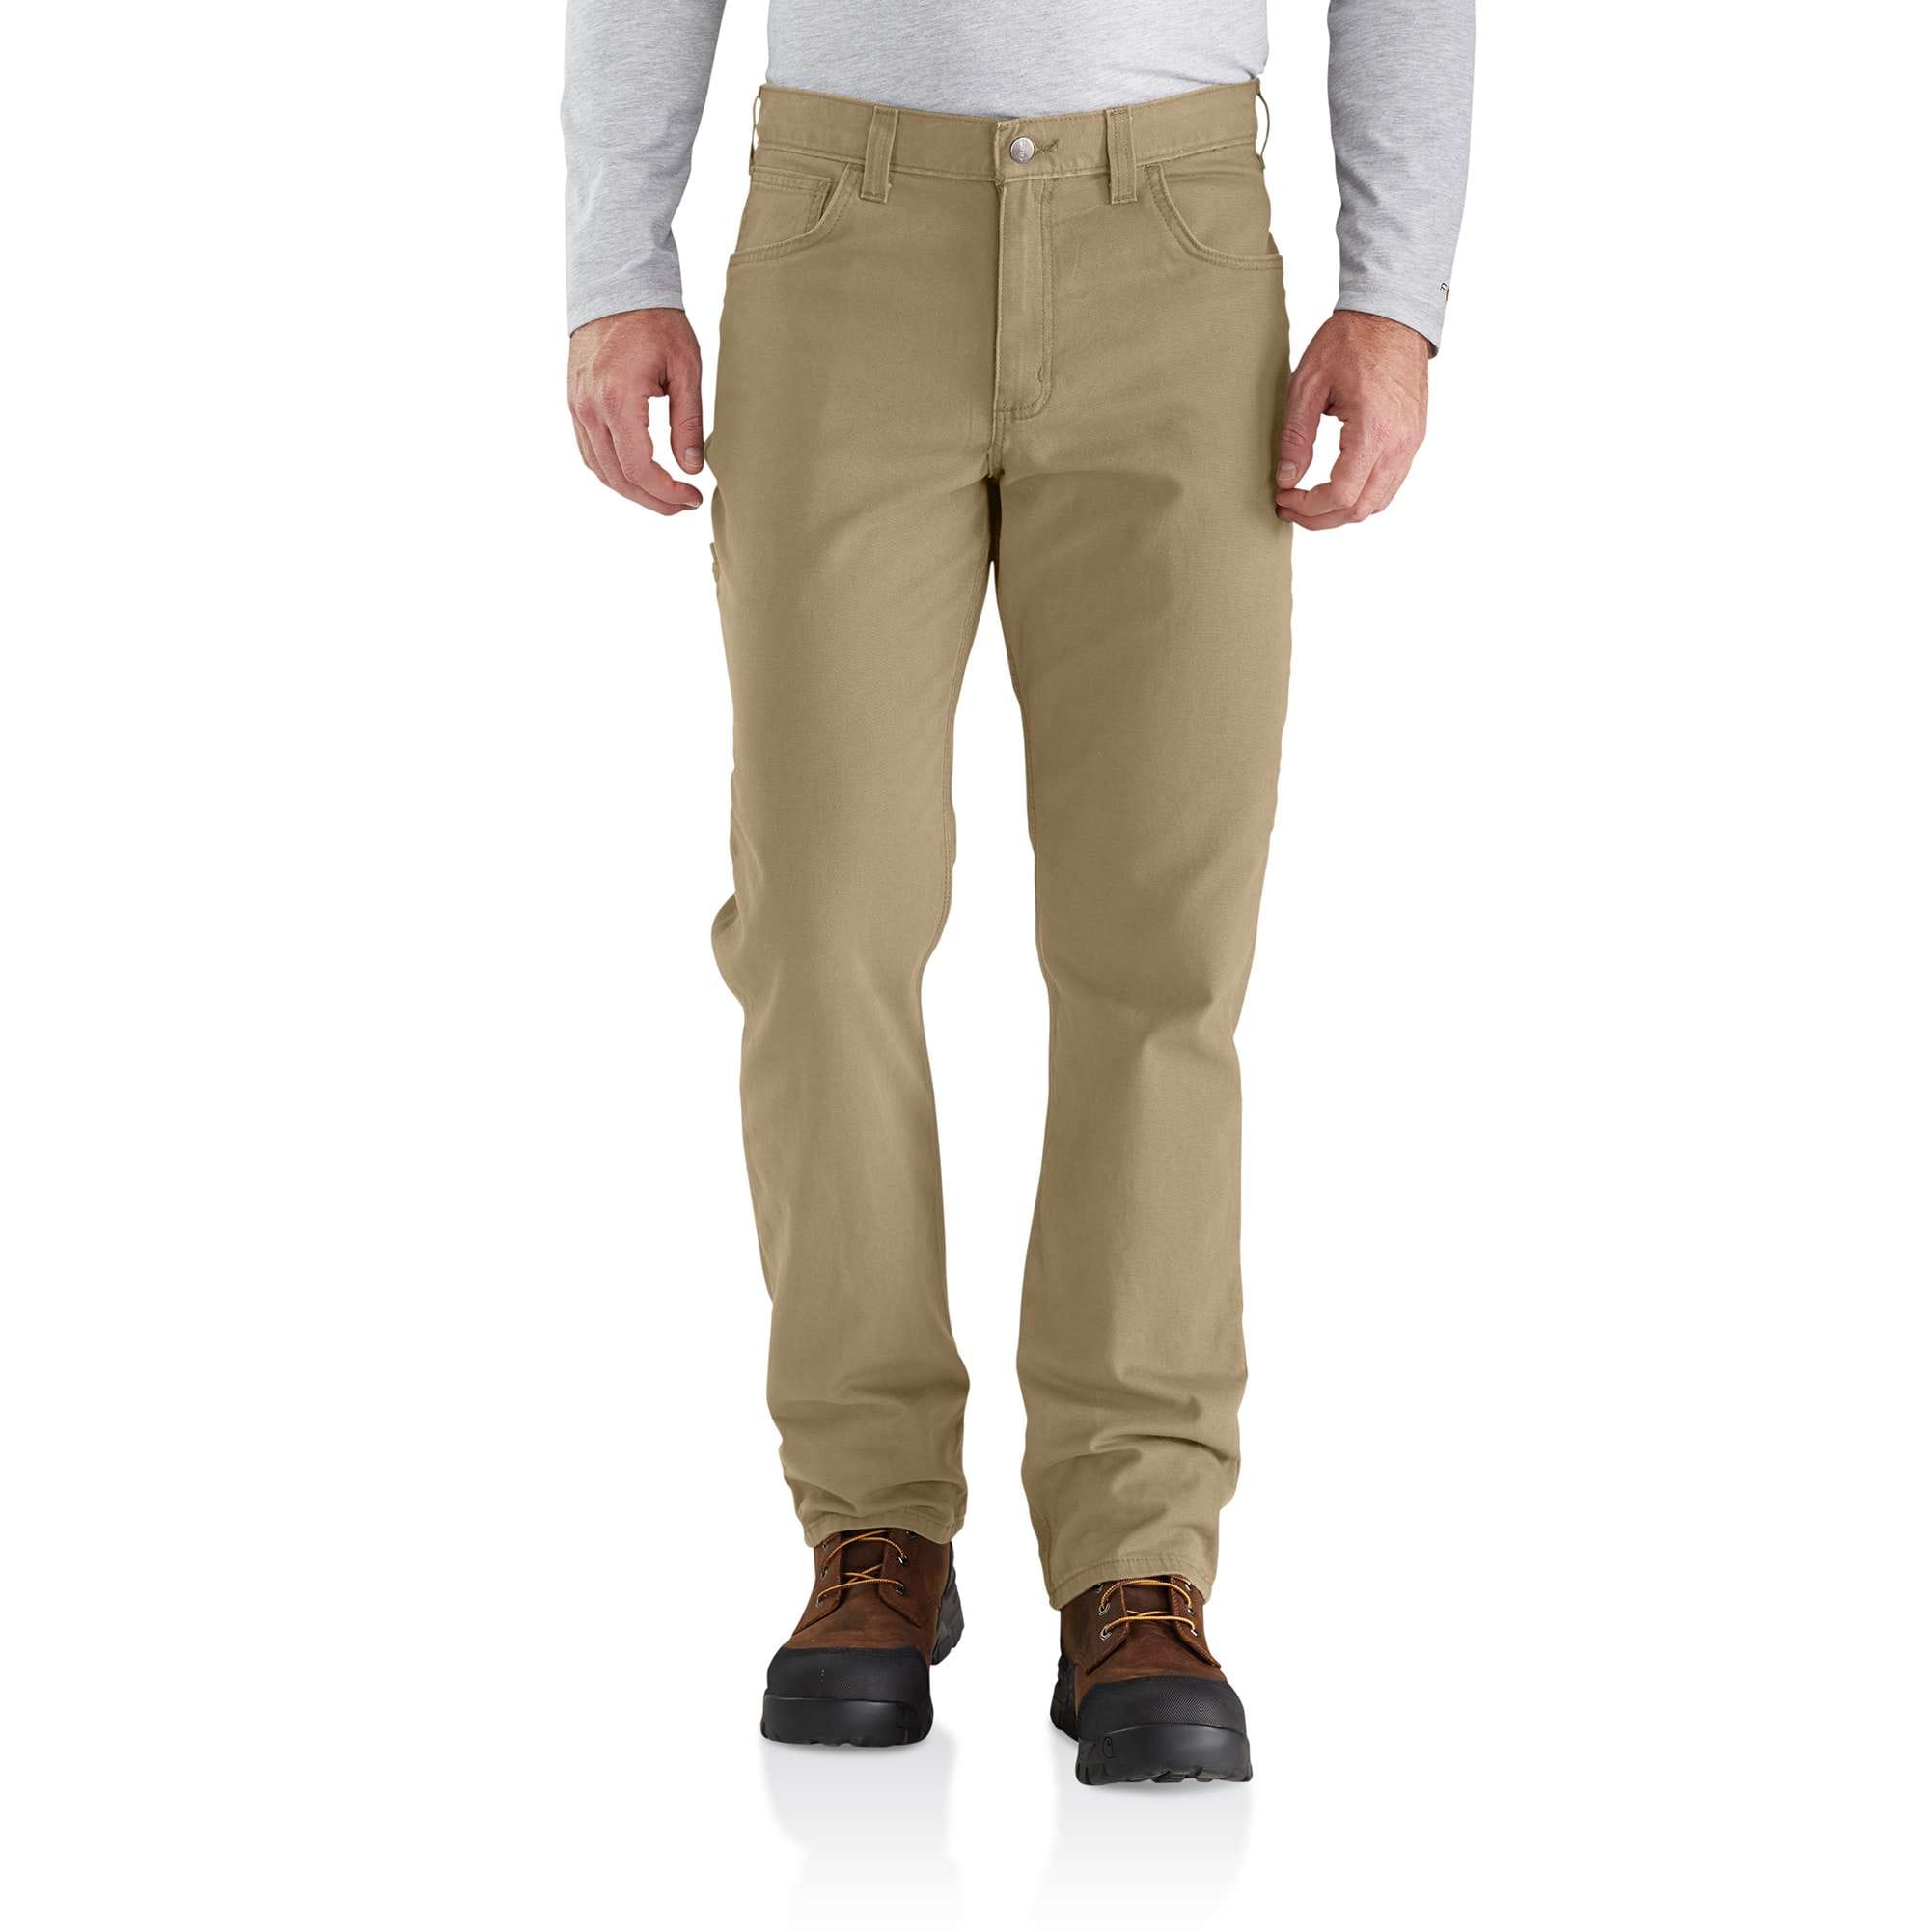 Easy Fit Men's Uniform Pants for Casino or Hotel Staff